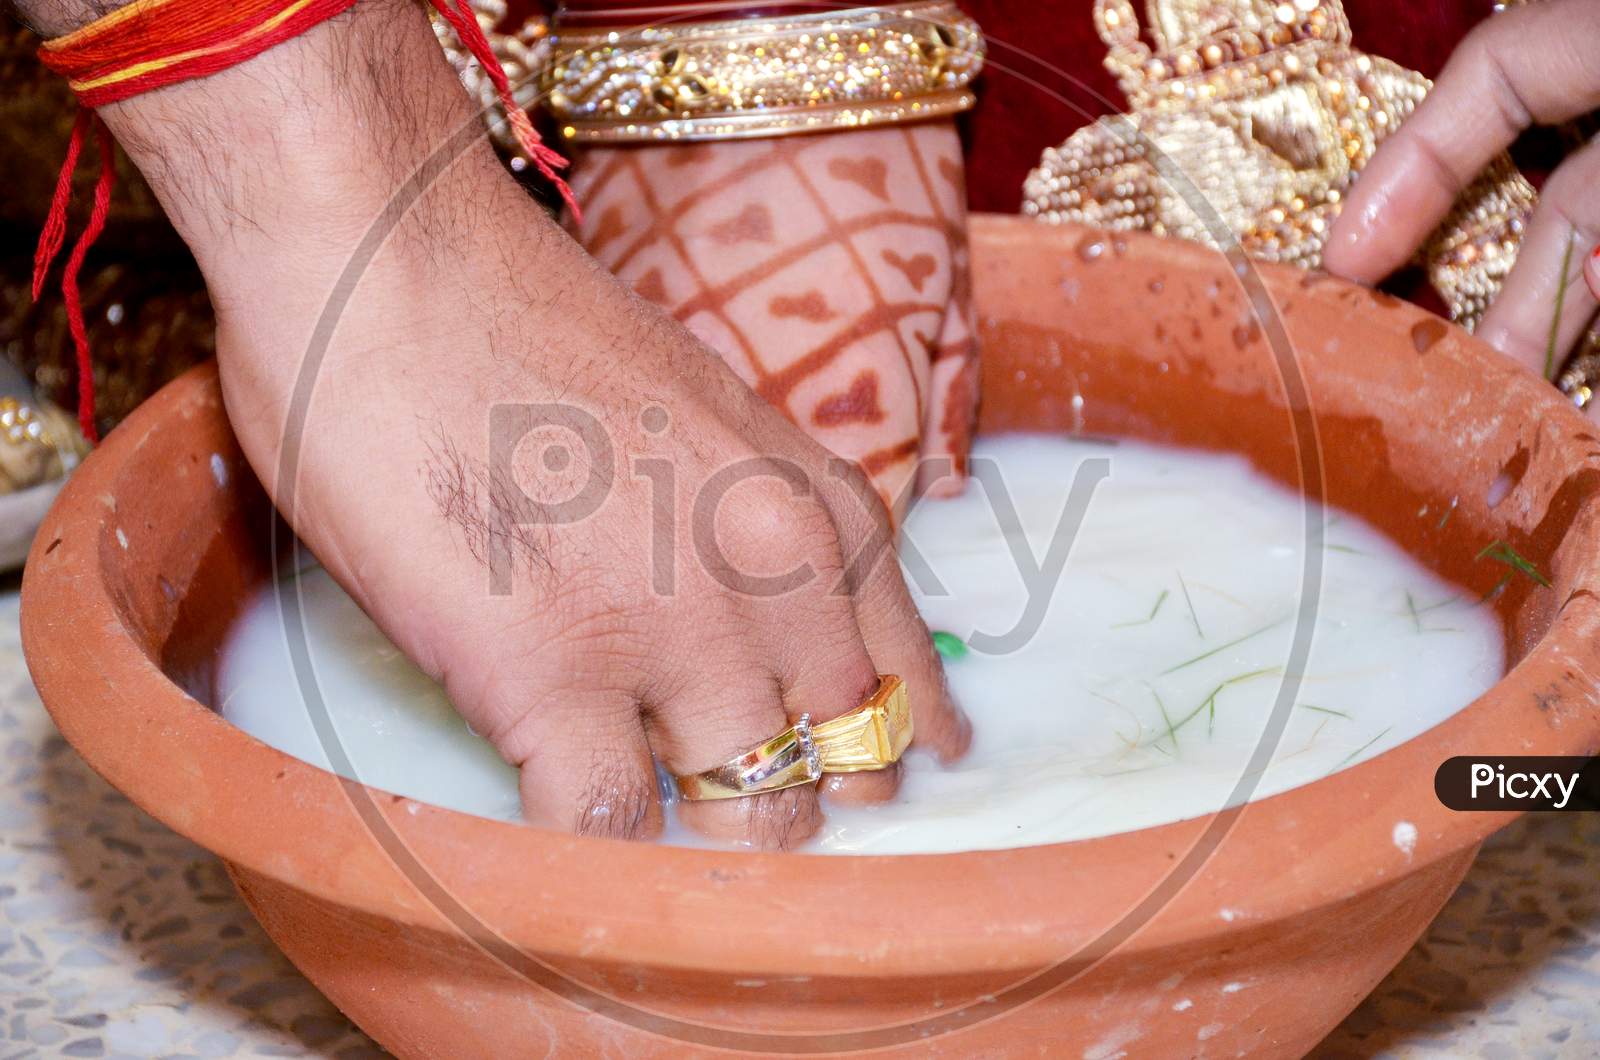 Indian Couple Playing Ring Fishing Game In Wedding Ceremony Of India